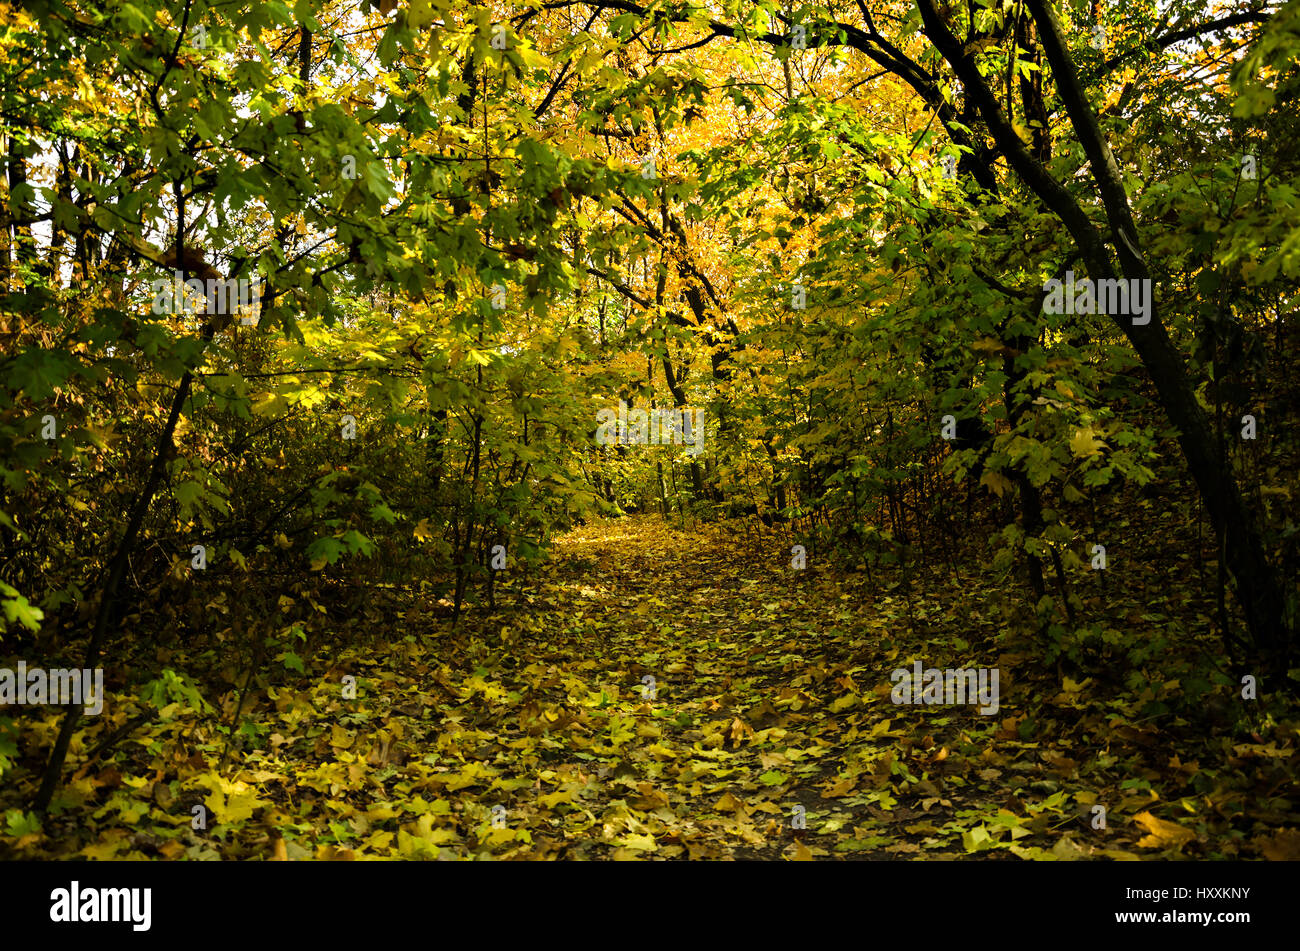 Autumn warm day, a beautiful trail in the forest Uslan yellow leaves of trees Stock Photo